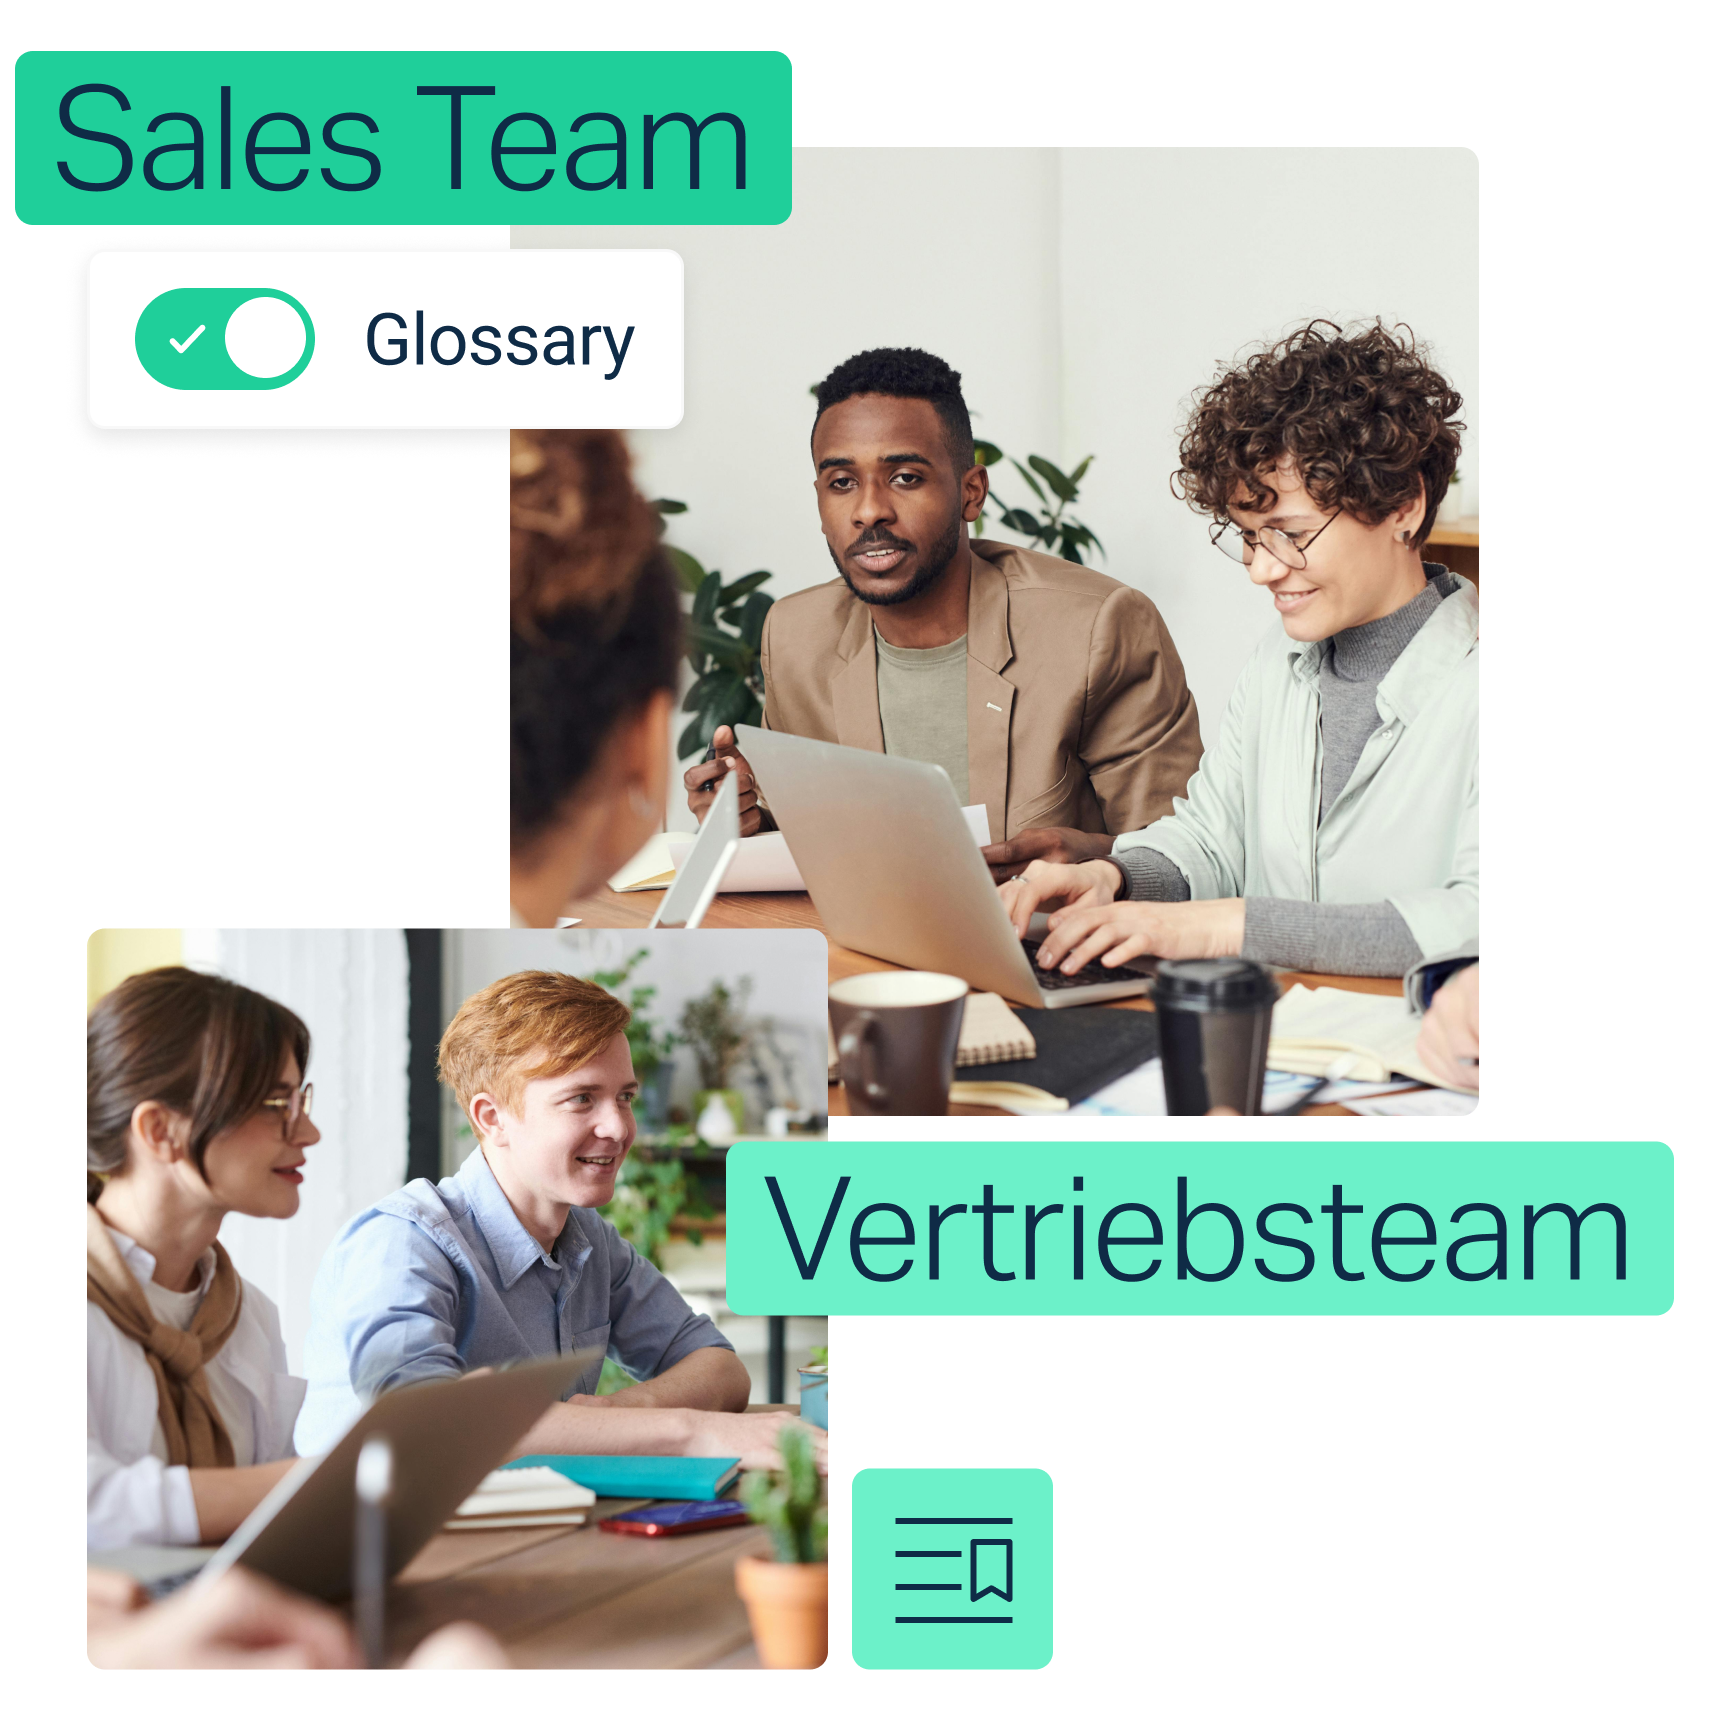 Photos of people with with text labels of "Sales Team" and "Glossary"